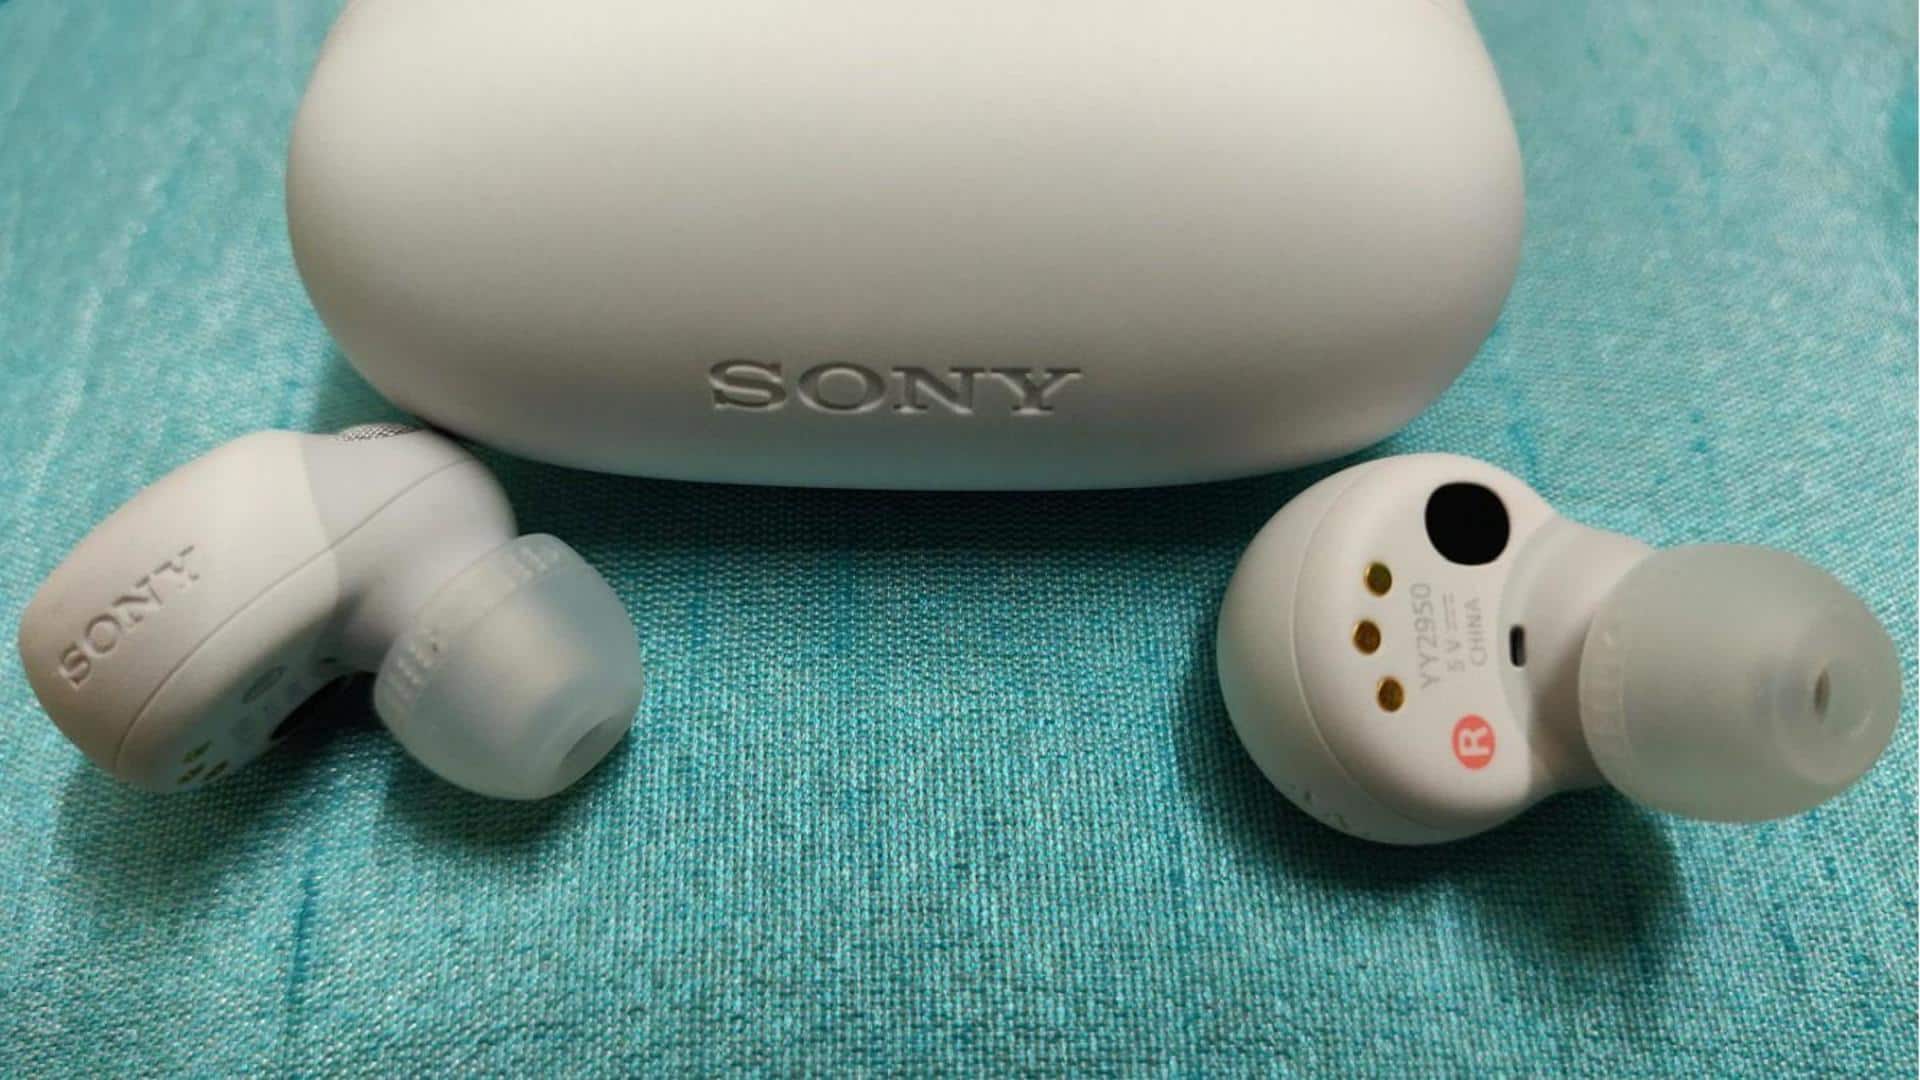 Sony WF-LS900N earphones review: Good sound, great features, but overpriced